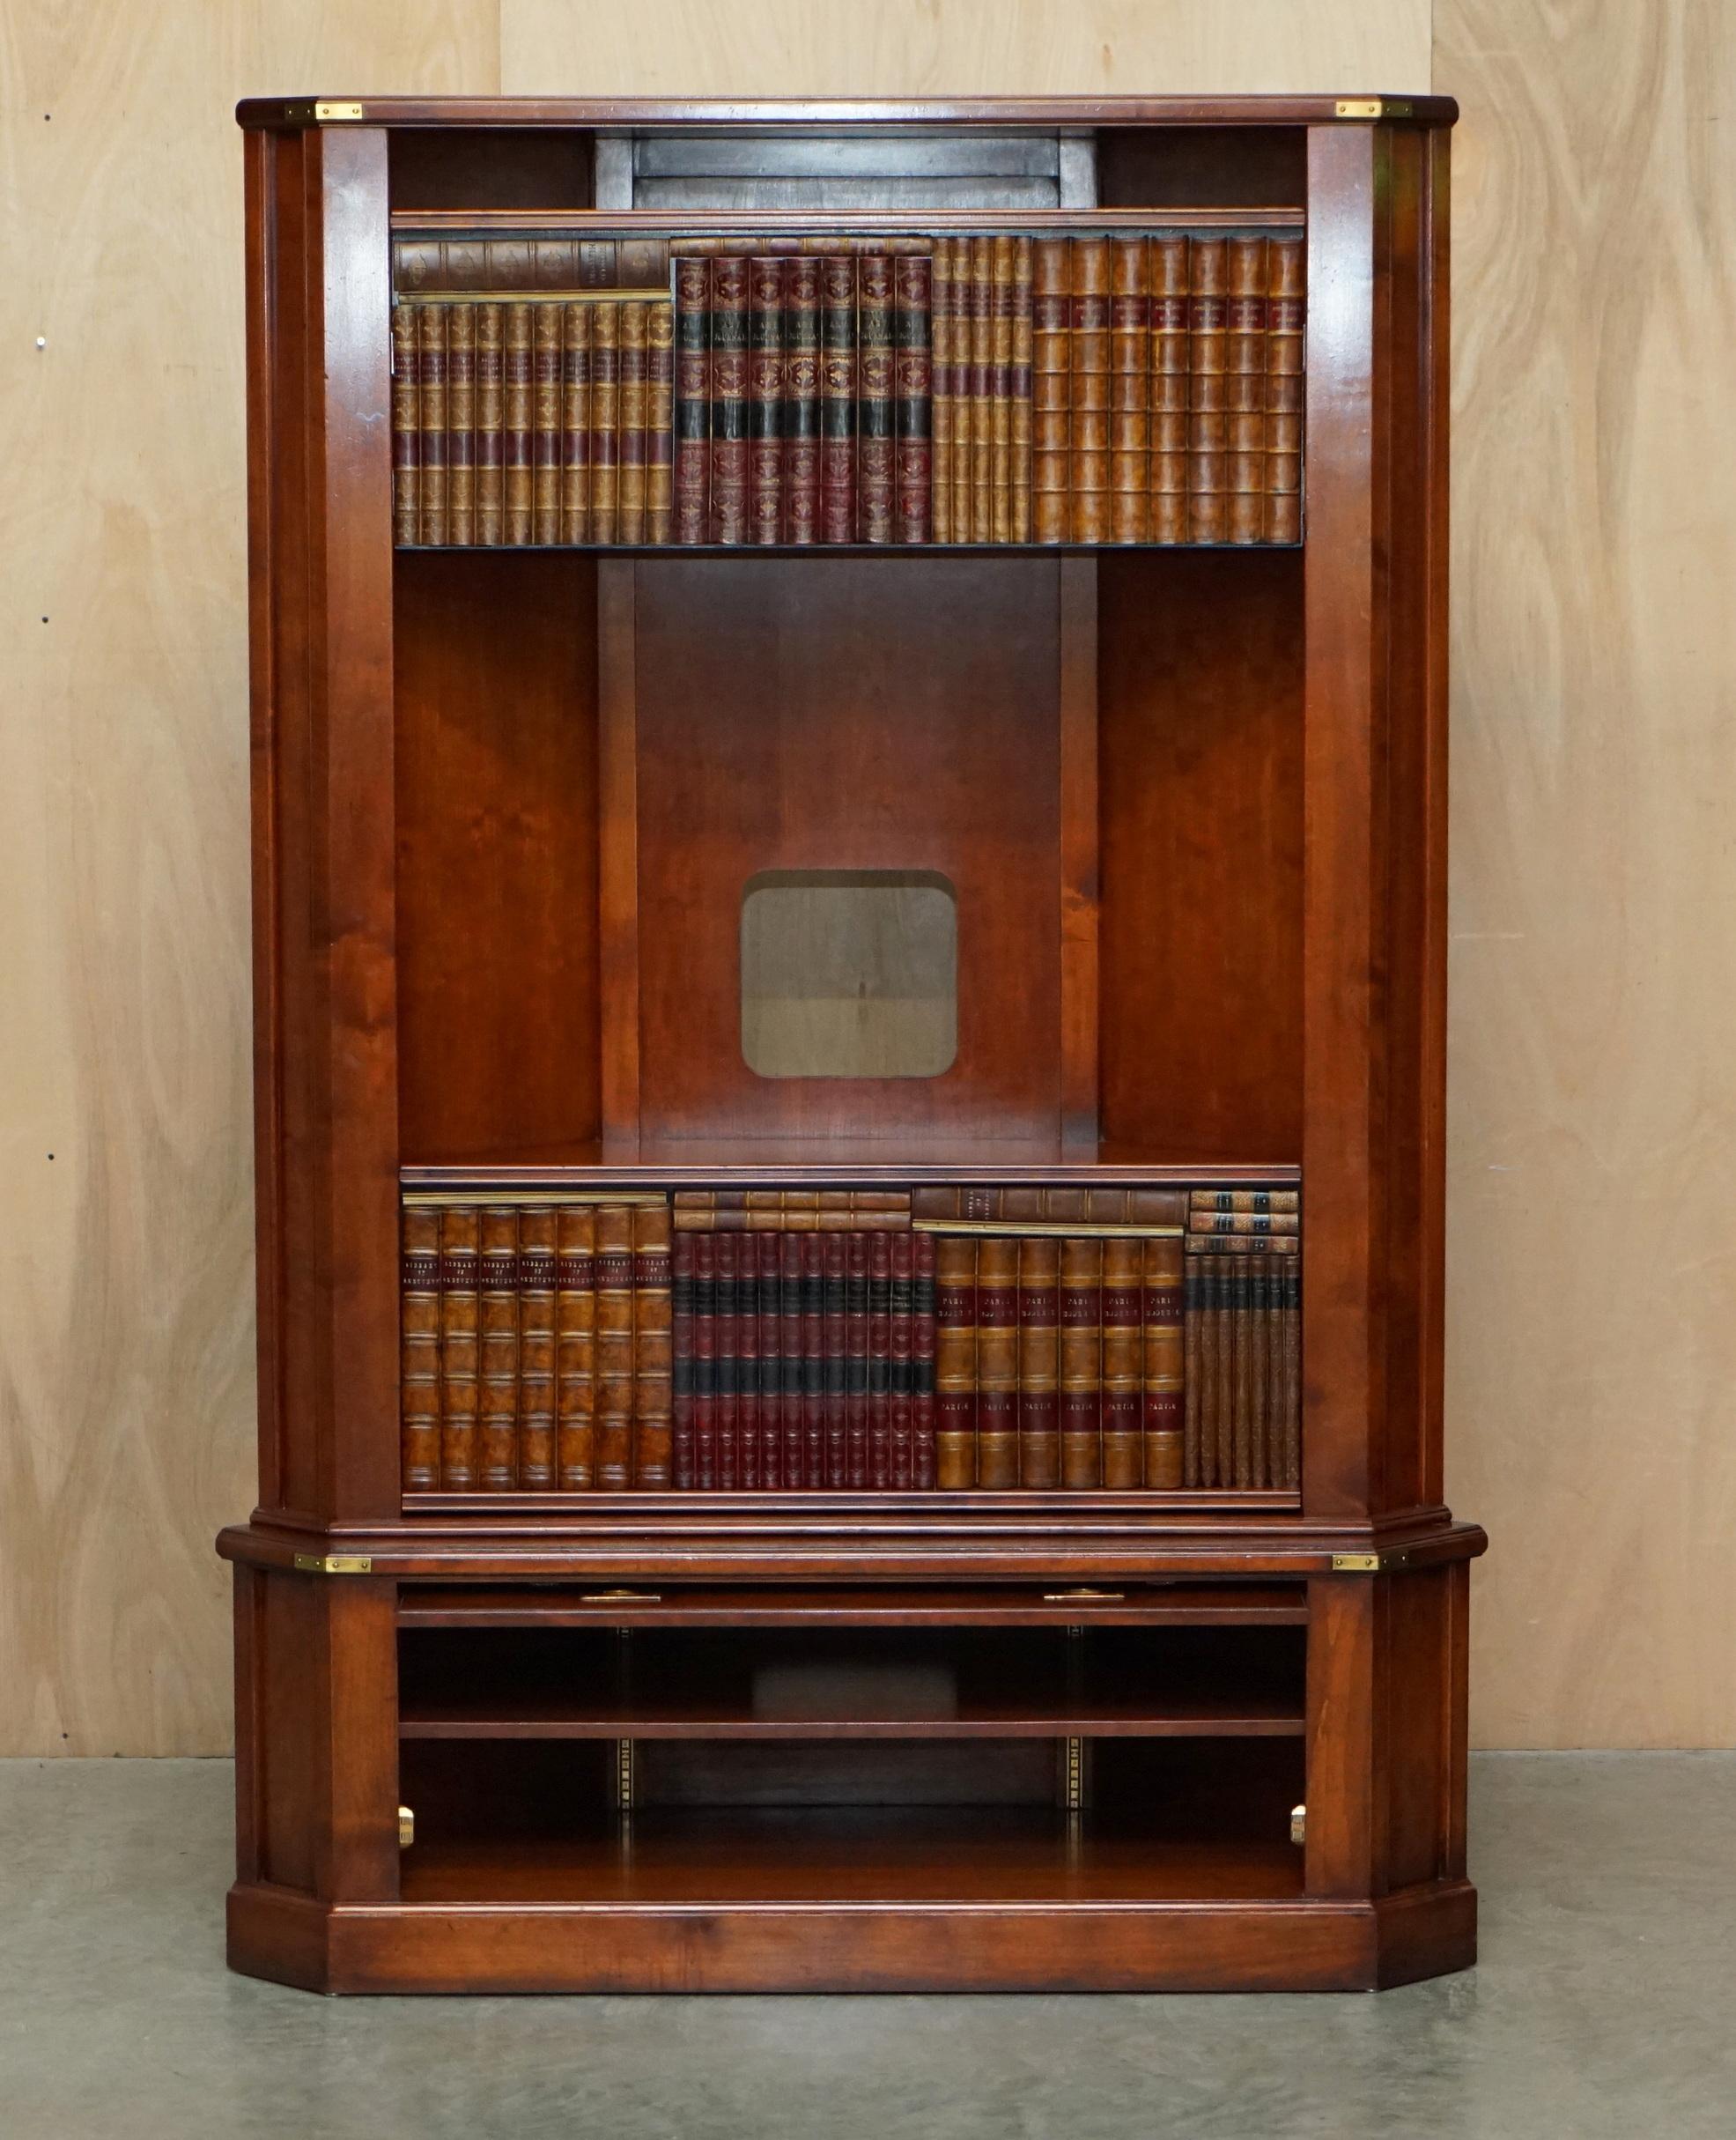 1 of 2 Harrods London Kennedy Hardwood Bookcase Home Bar Cabinet Faux Books For Sale 7